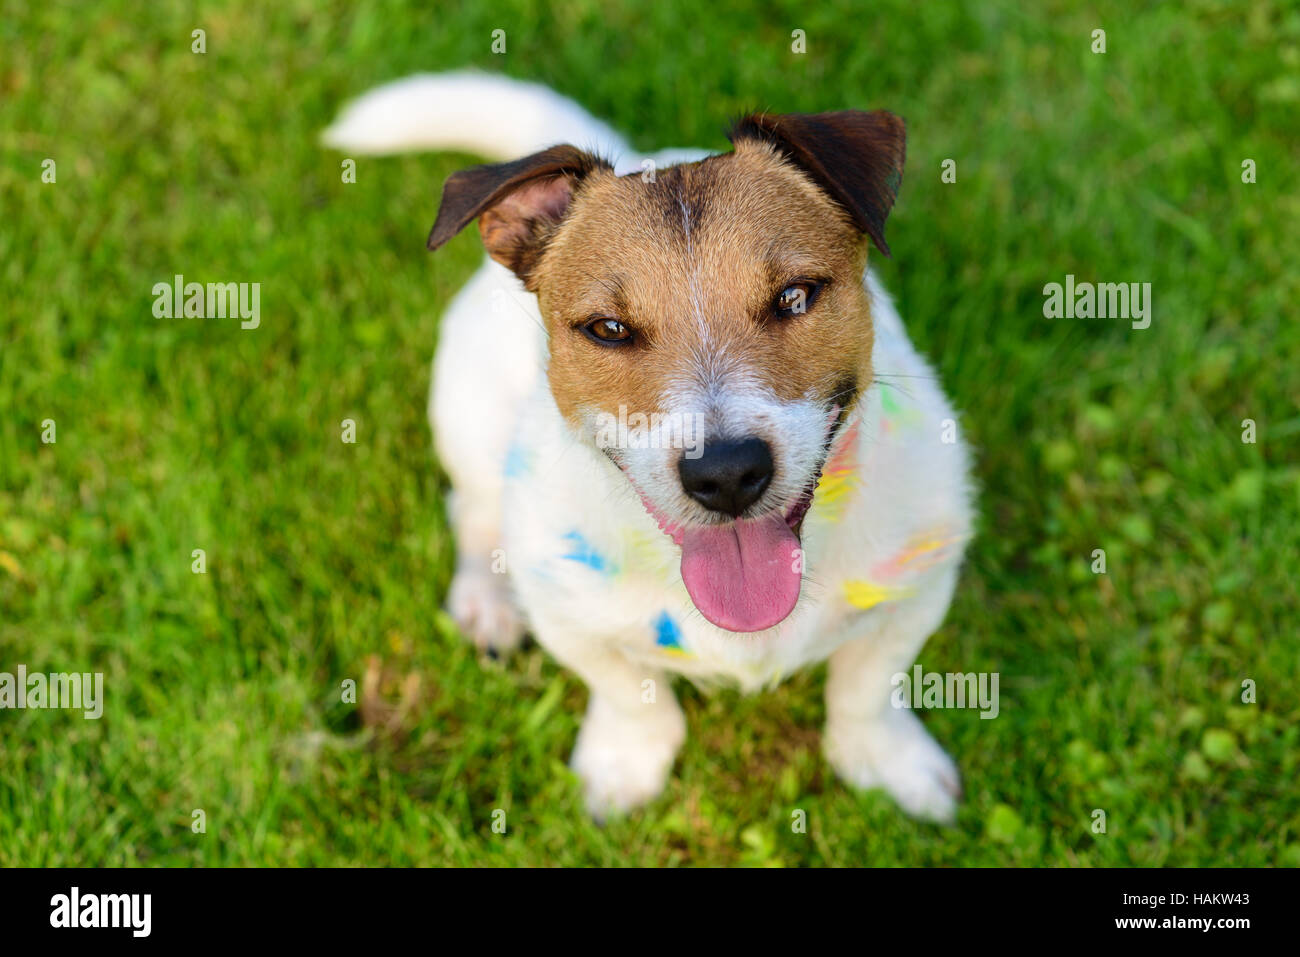 Happy, contented dog smiling and looking up into camera Stock Photo